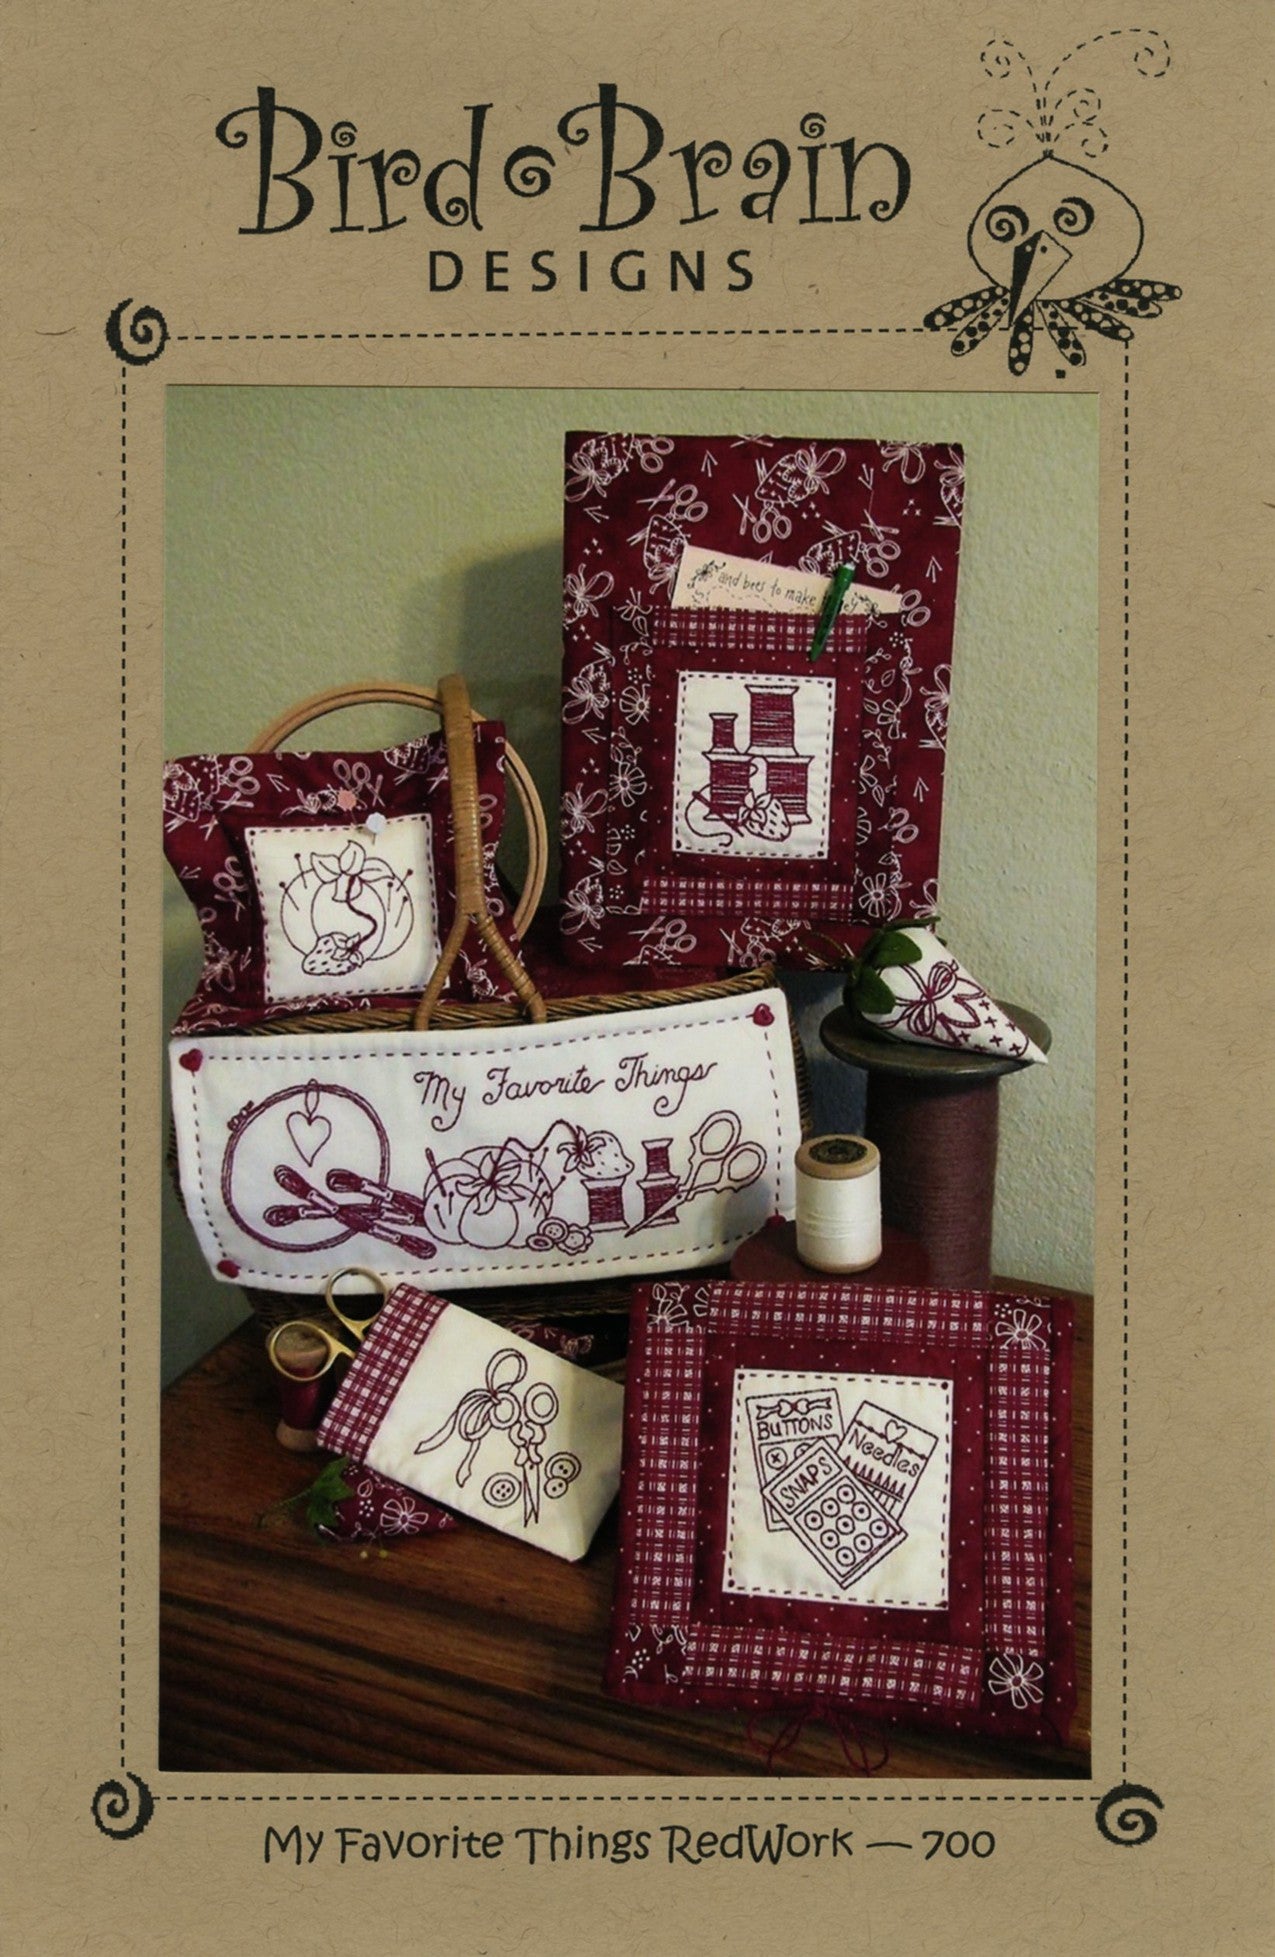 My Favorite Things Redwork Hand Embroidery Pattern by Robin Kingsley of Bird Brain Designs